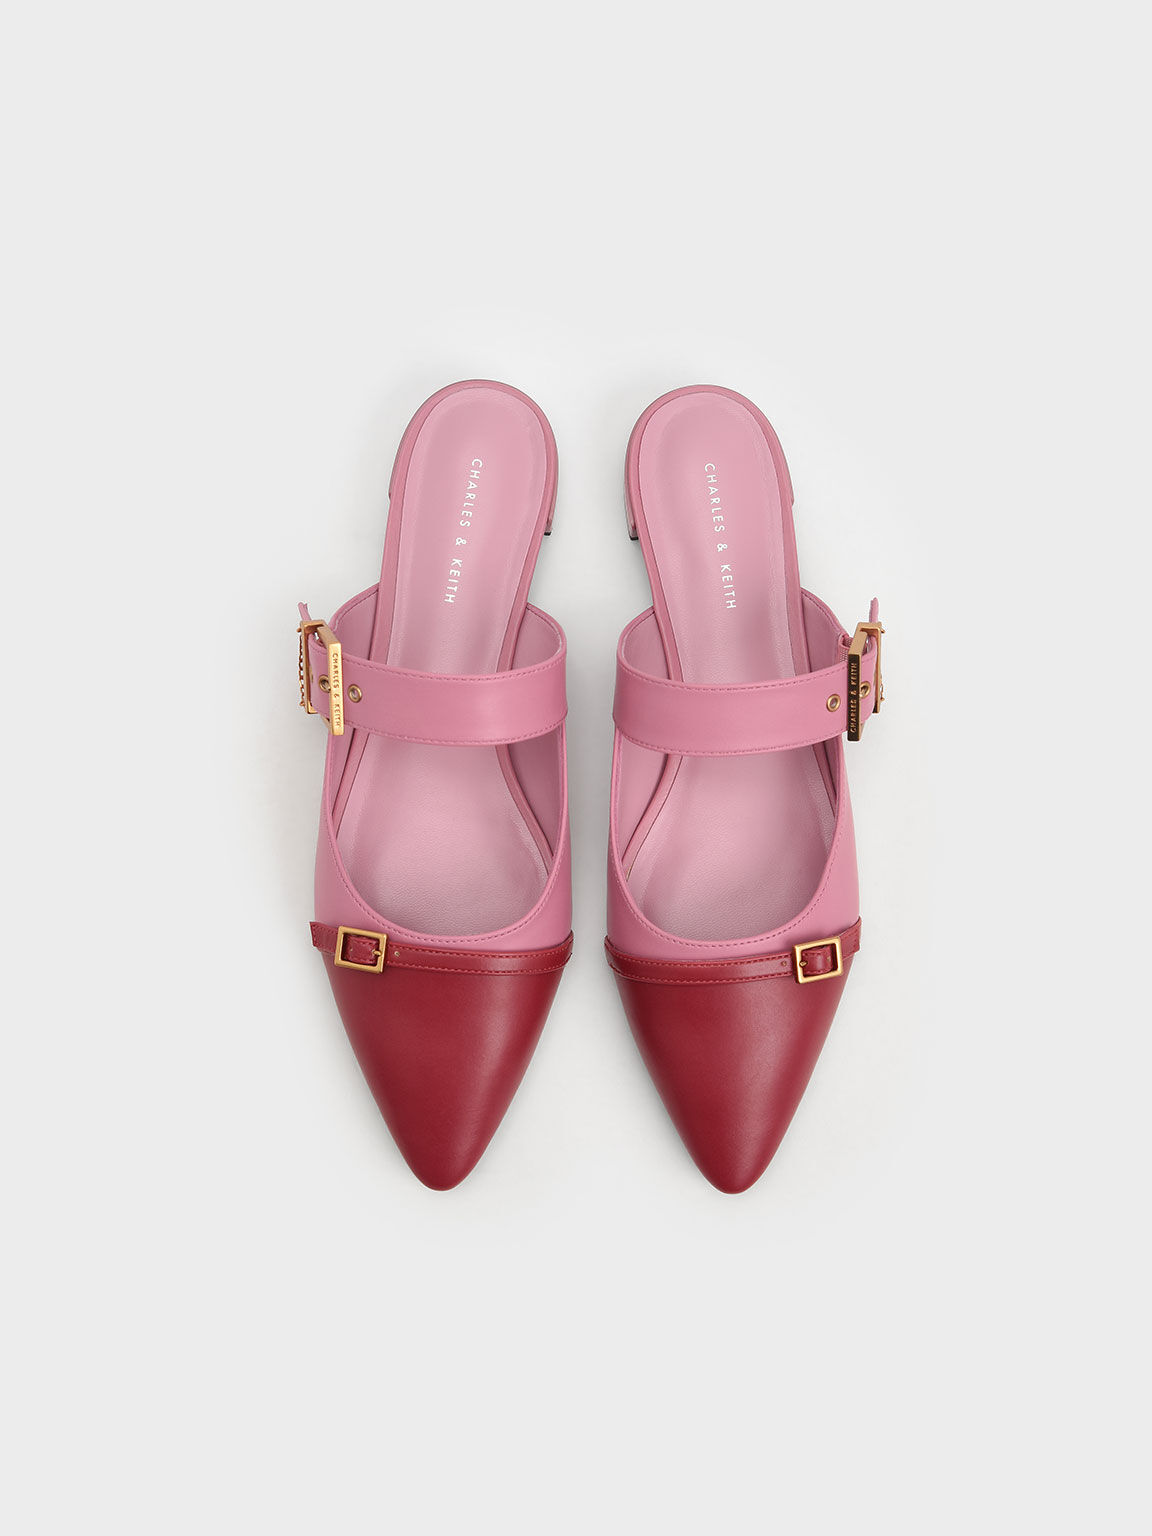 Hadley Double Buckle Flat Mules, Pink, hi-res